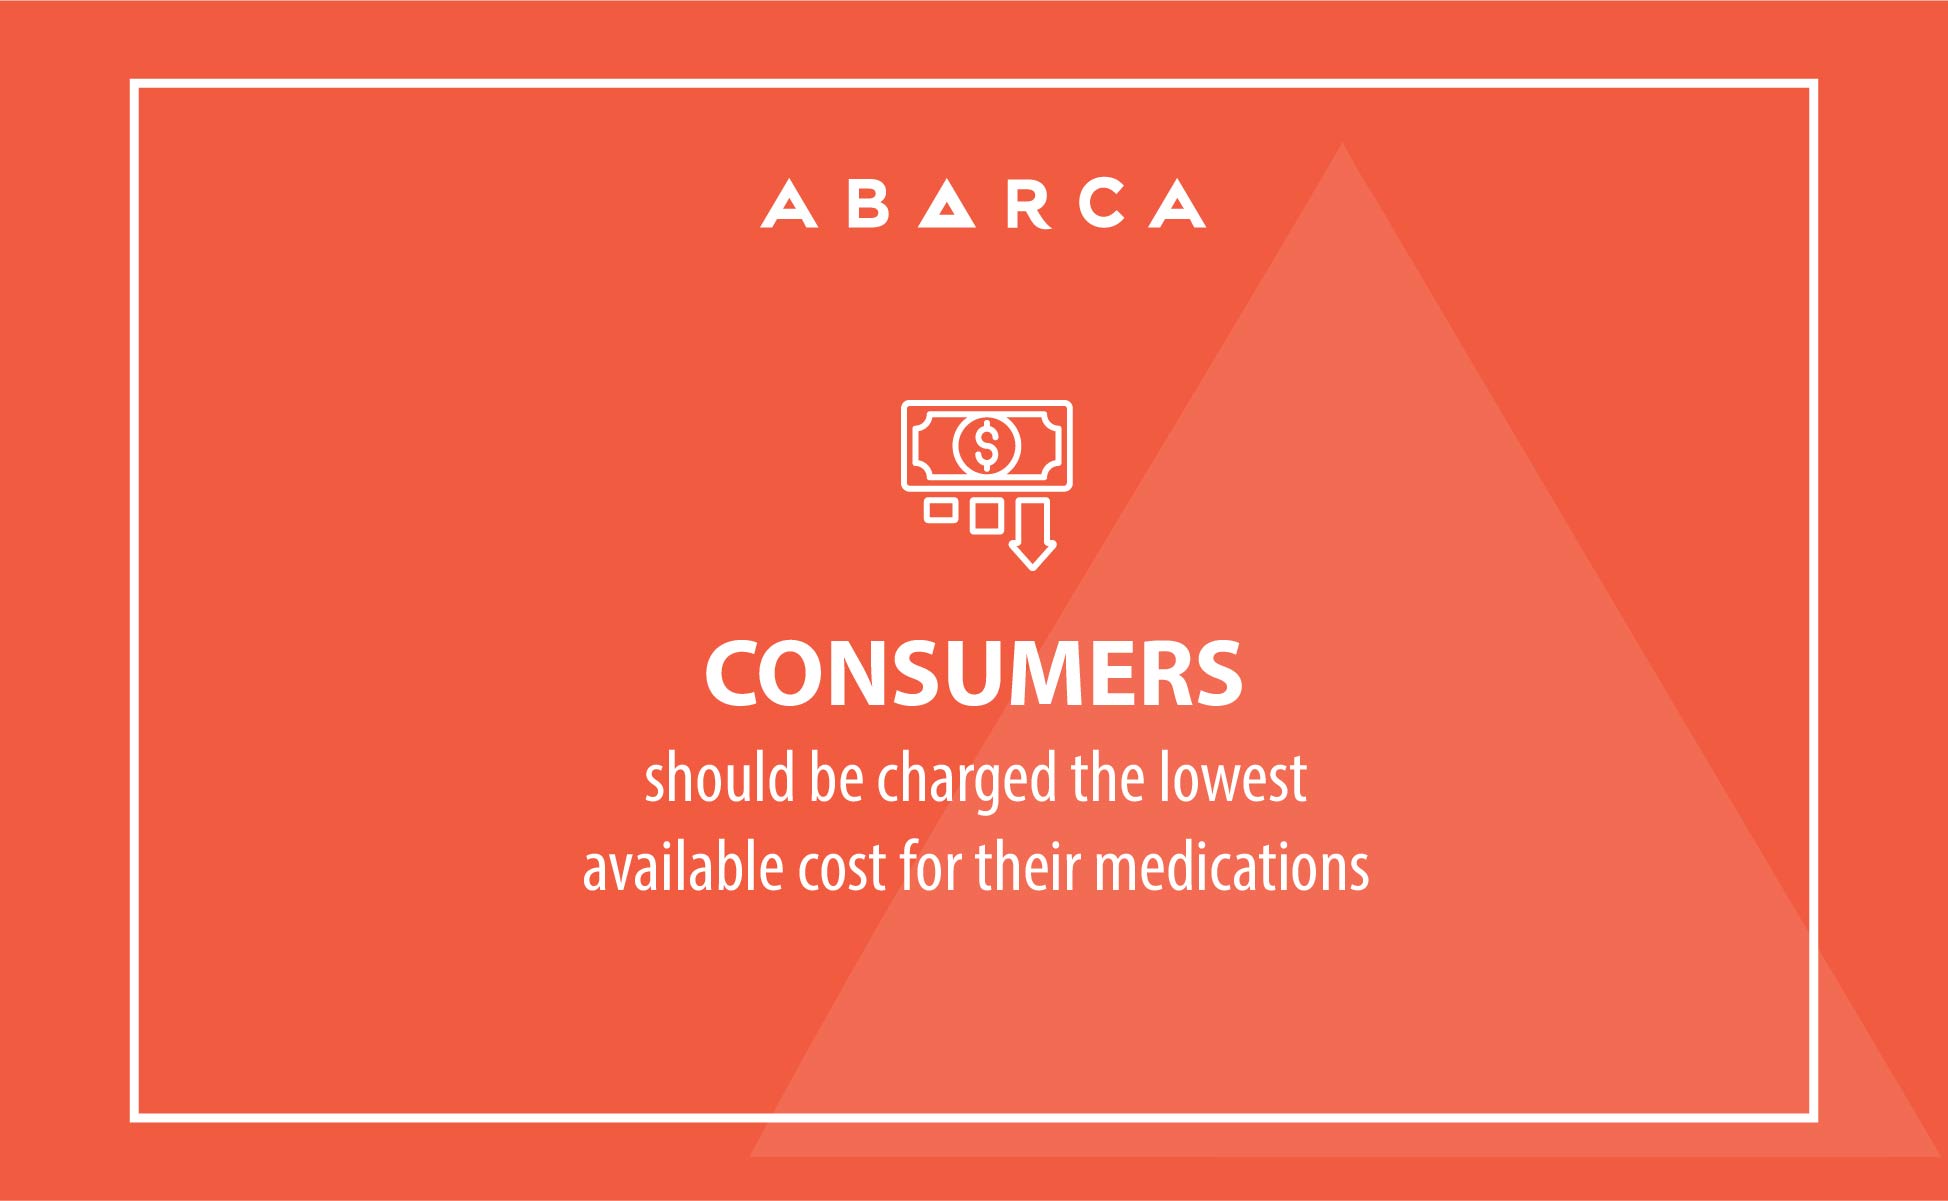 Abarca Health: Consumers should be charged the lowest available cost for their medications